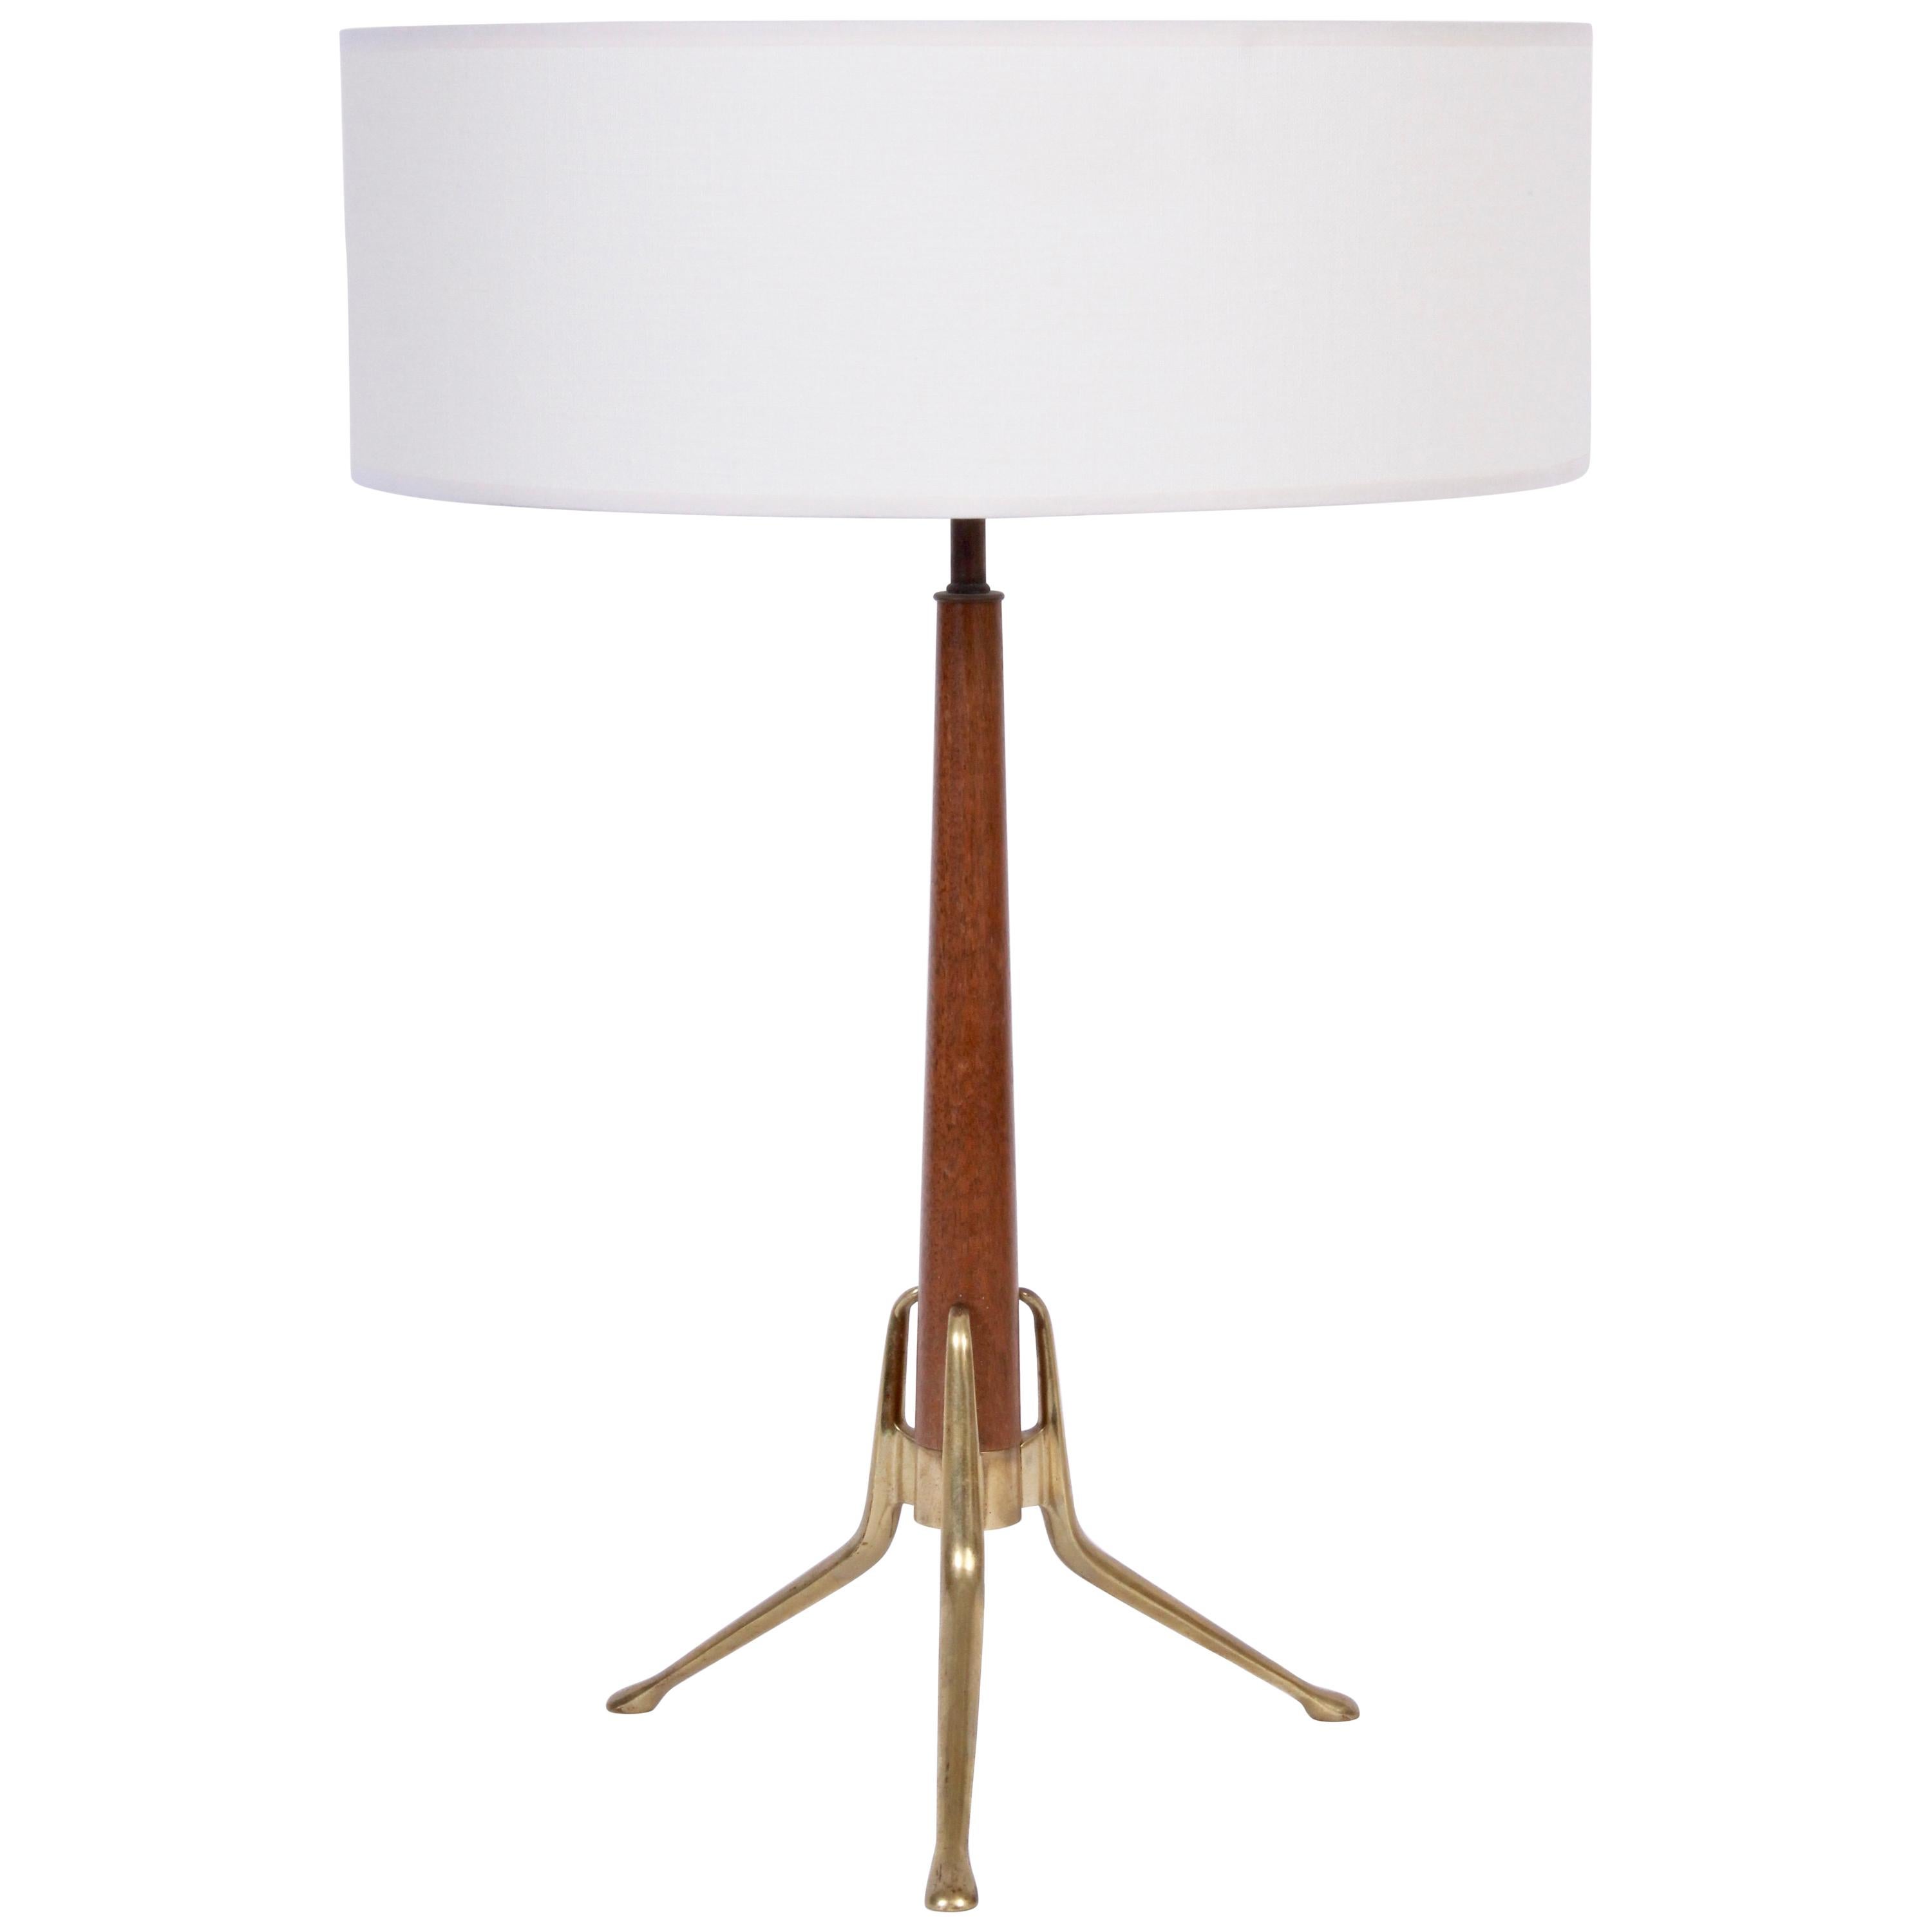 Gerald Thurston for Lightoilier Brass & Wood Tripod Table Lamp with White Shade